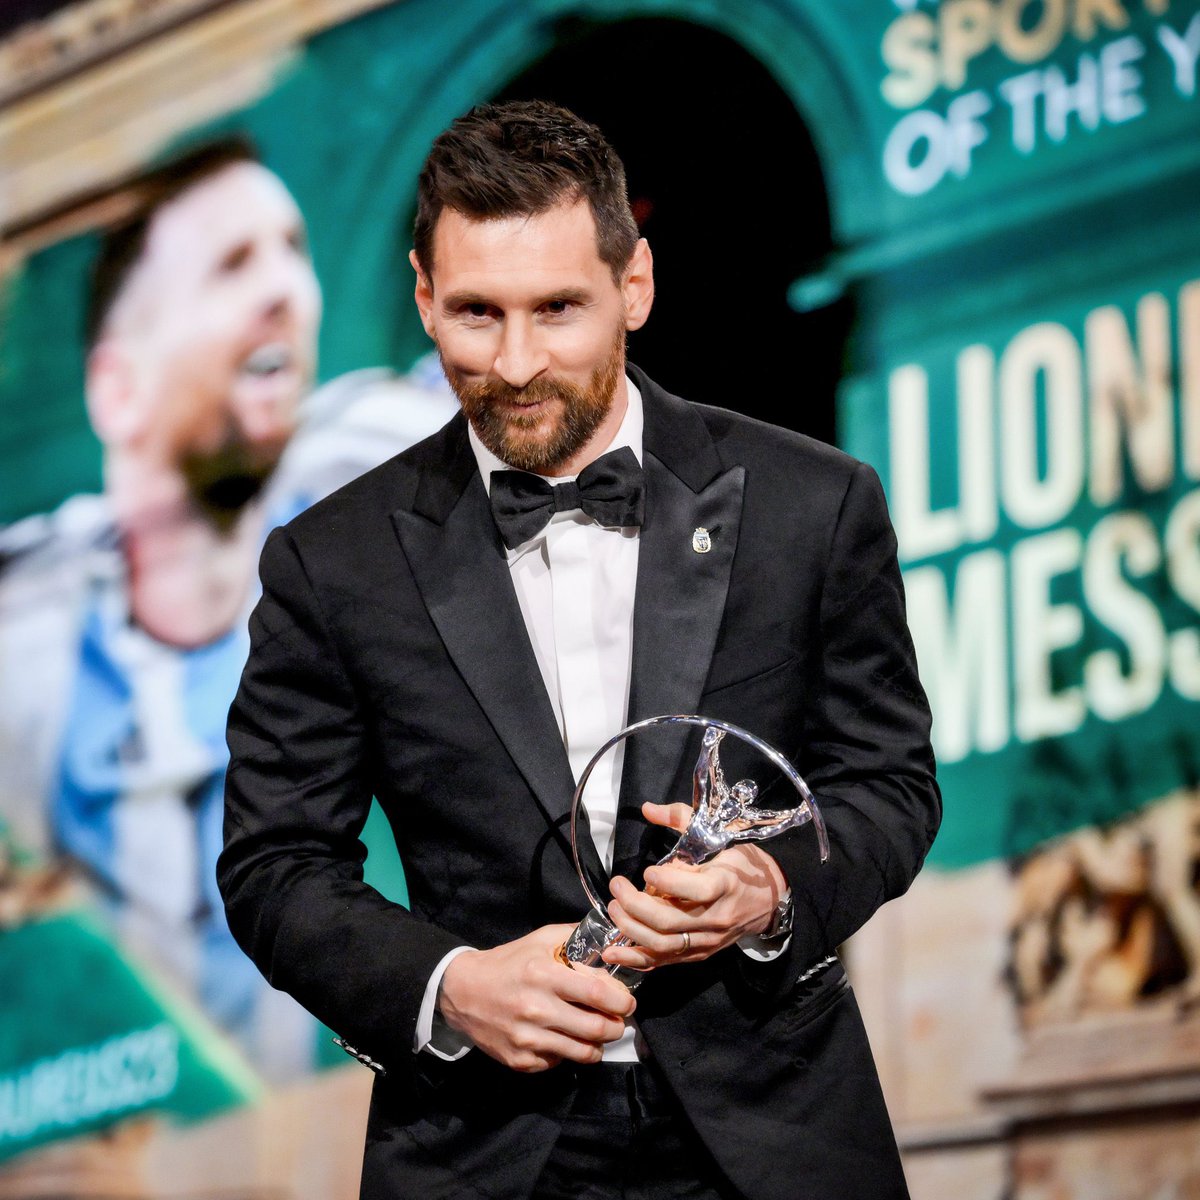 Laureus sportsman of the year for the second time 

Leo Messi 🔥🐐

#GOAT #laureusaward